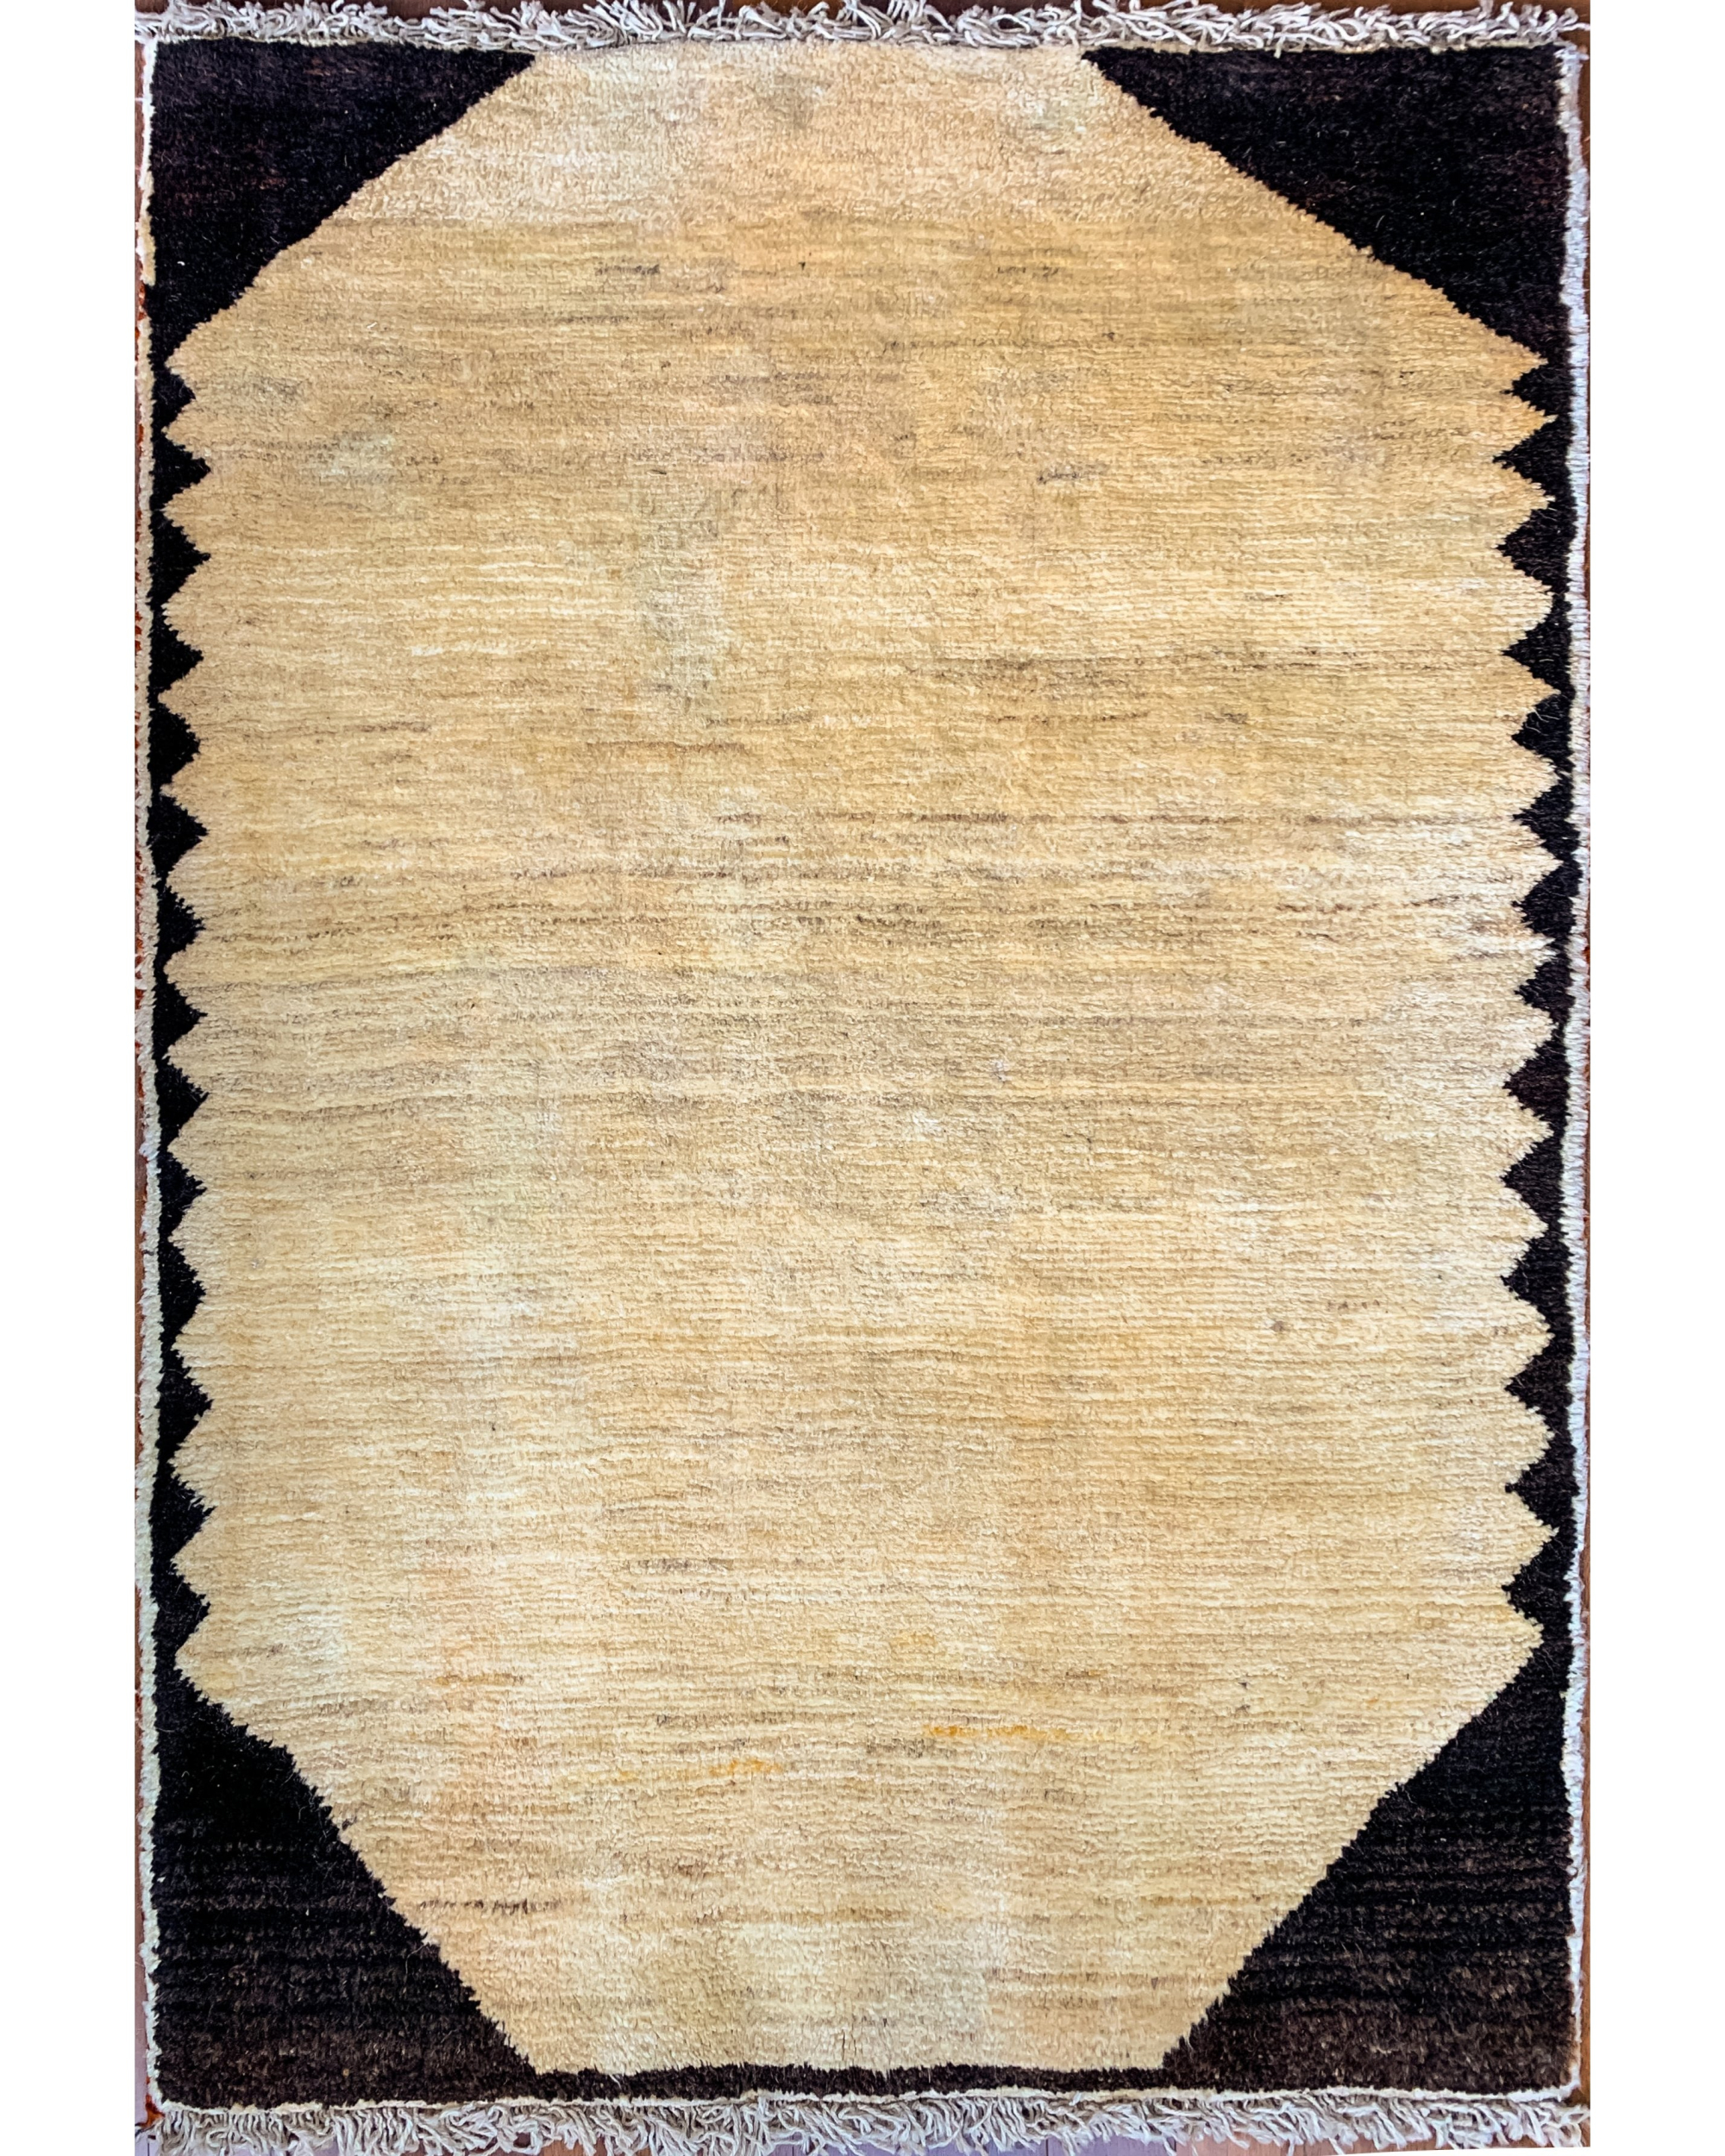 Area rug for living space and any room. Floor decor, rugs and carpets from Tabrizi Rugs. Gabbeh 60.9 - 2'9